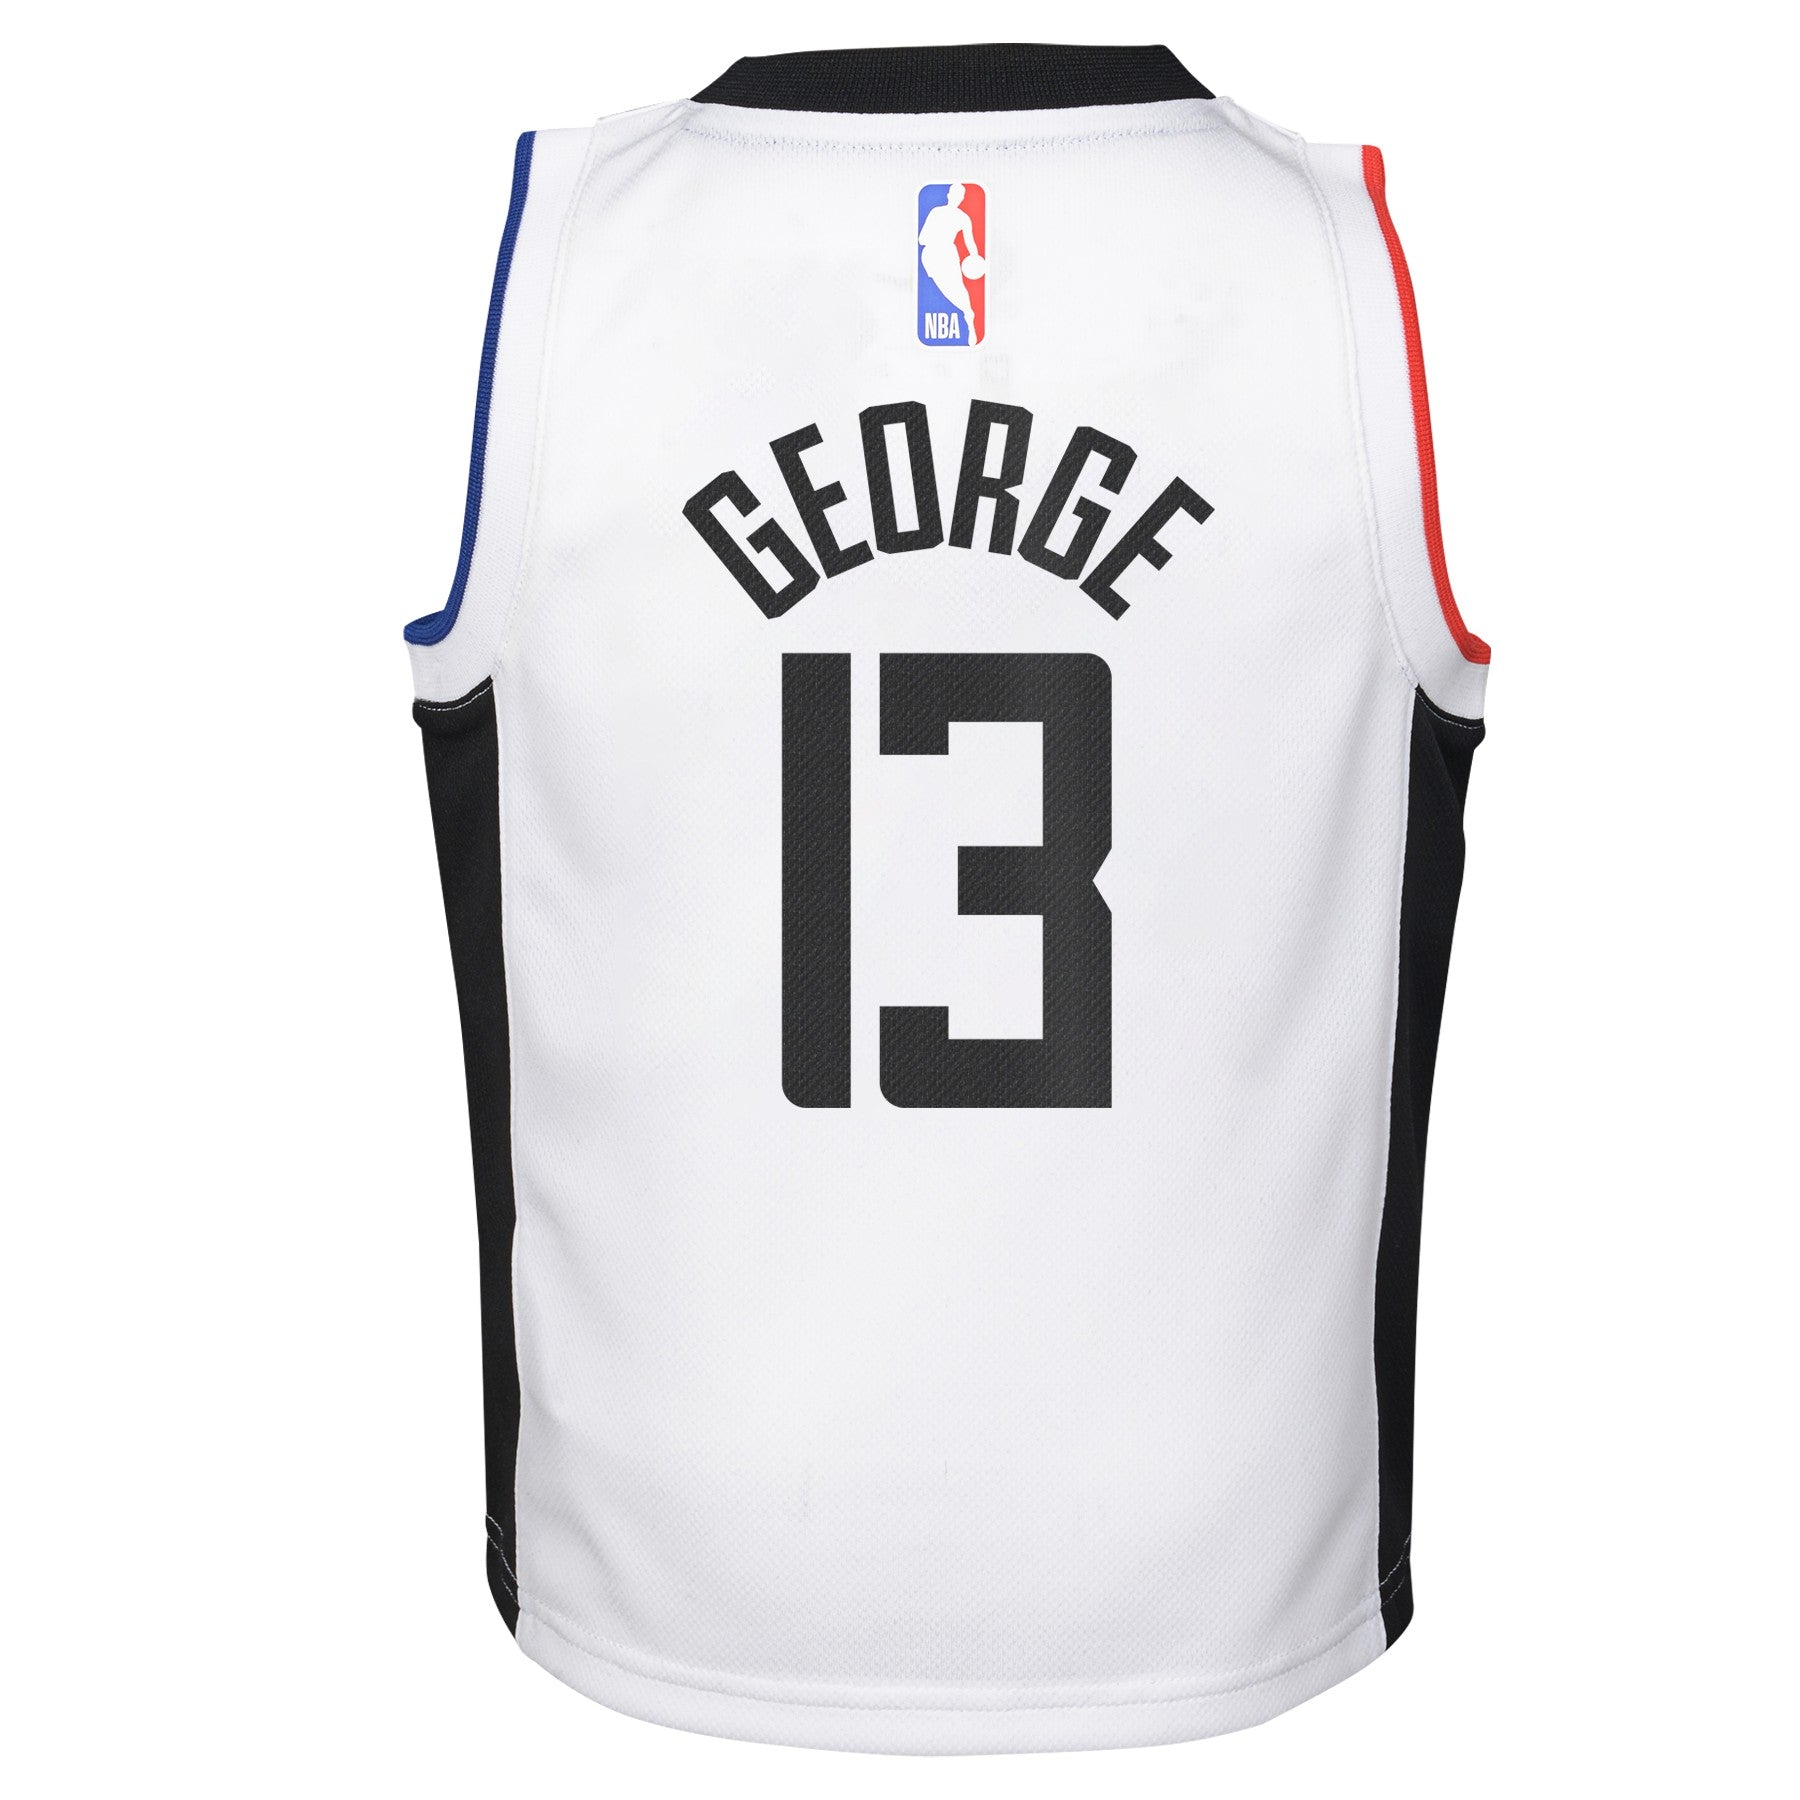  NBA Unisex-Toddler Official Player Name & Number Game